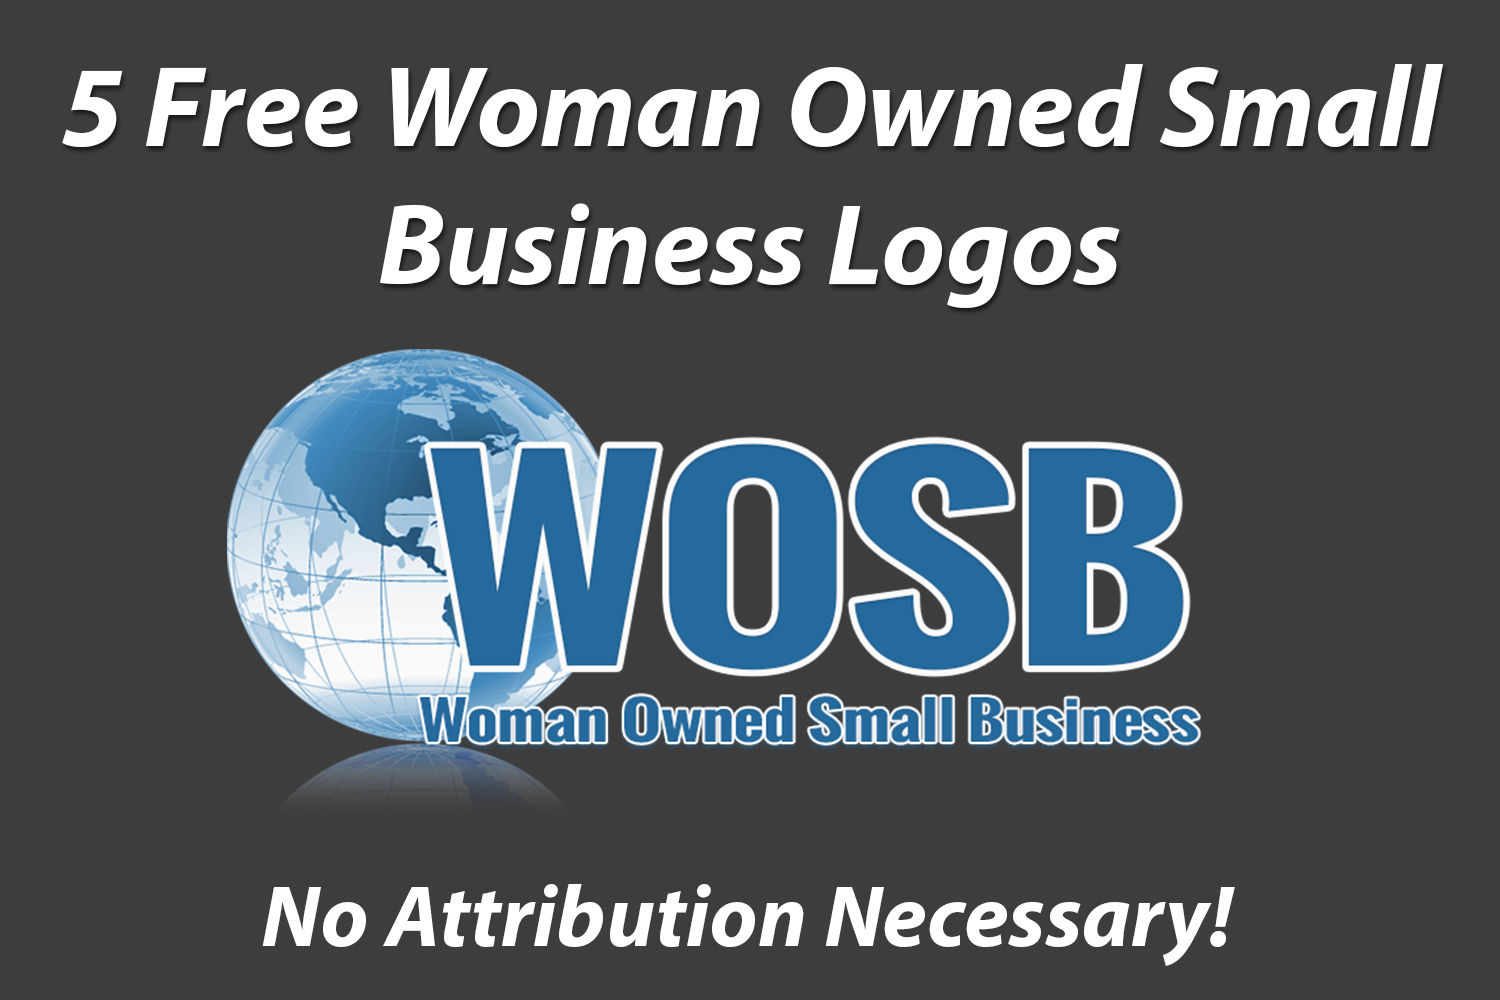 5 Free Woman Owned Small Business Logos